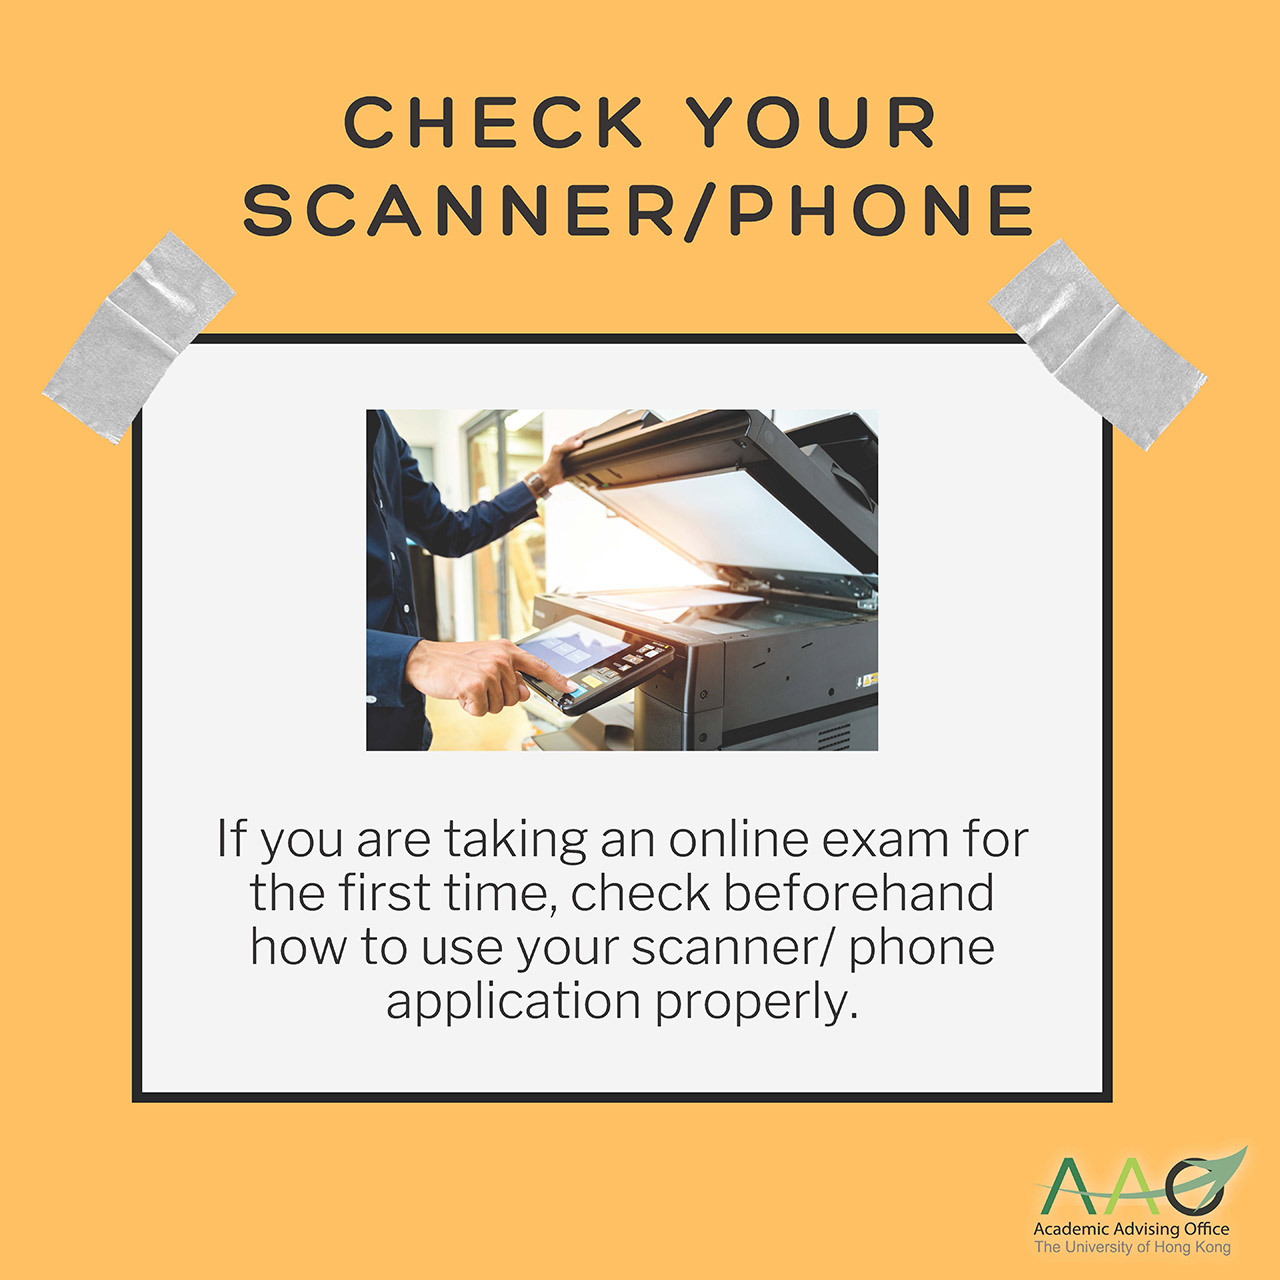 Check your scanner/phone: If you are taking an online exam for the first time, check beforehand how to use your scanner/ phone application properly.